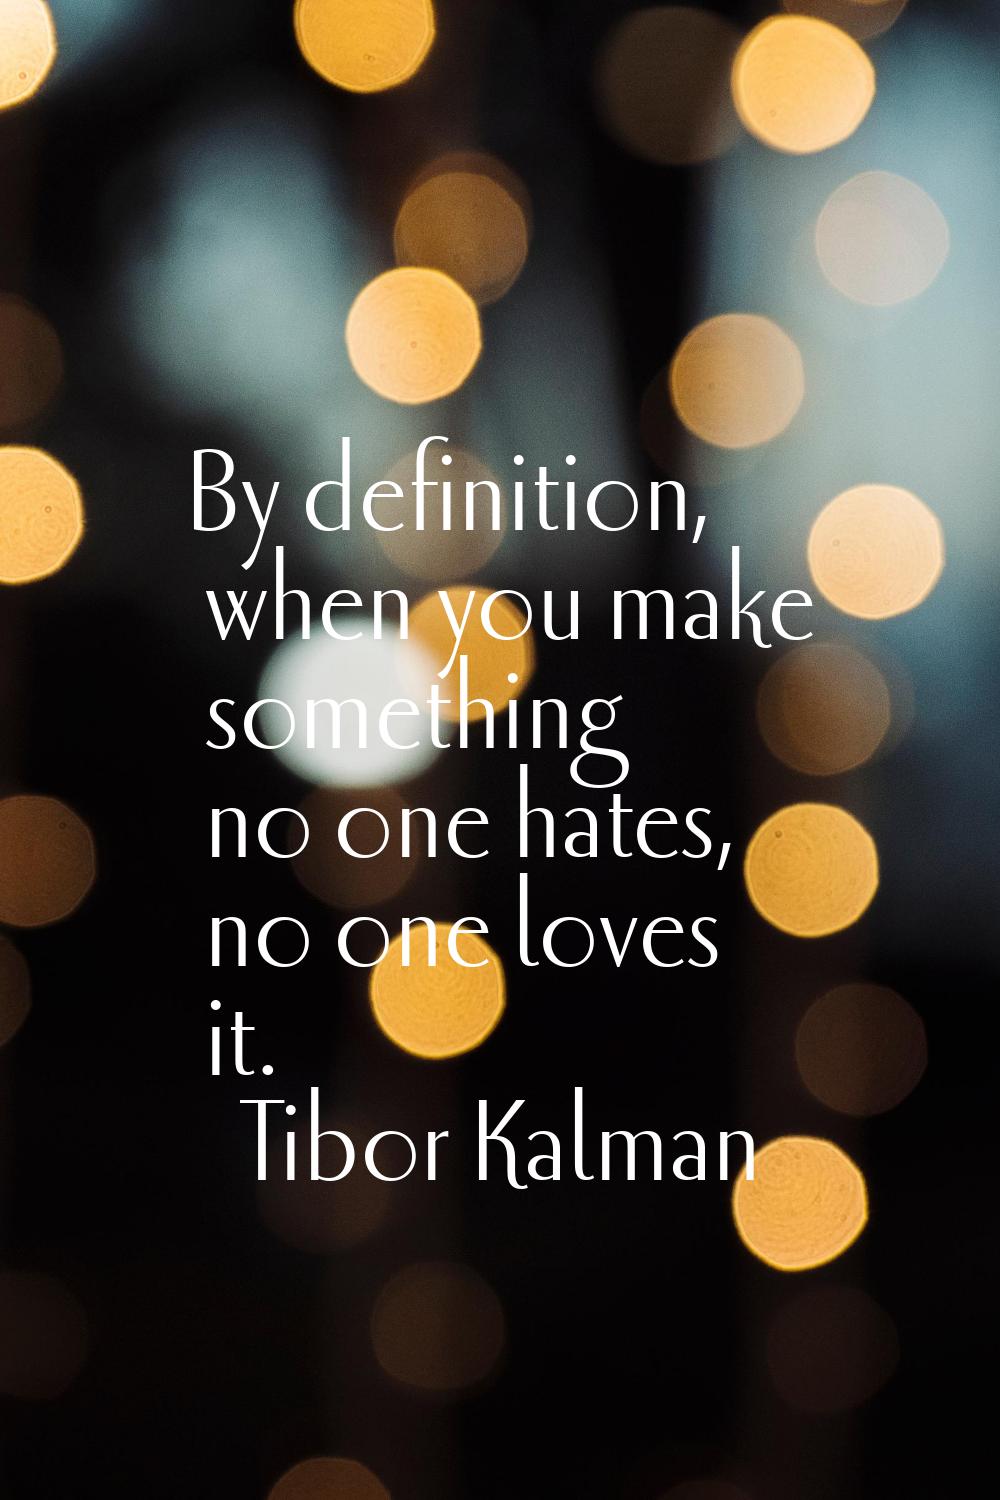 By definition, when you make something no one hates, no one loves it.